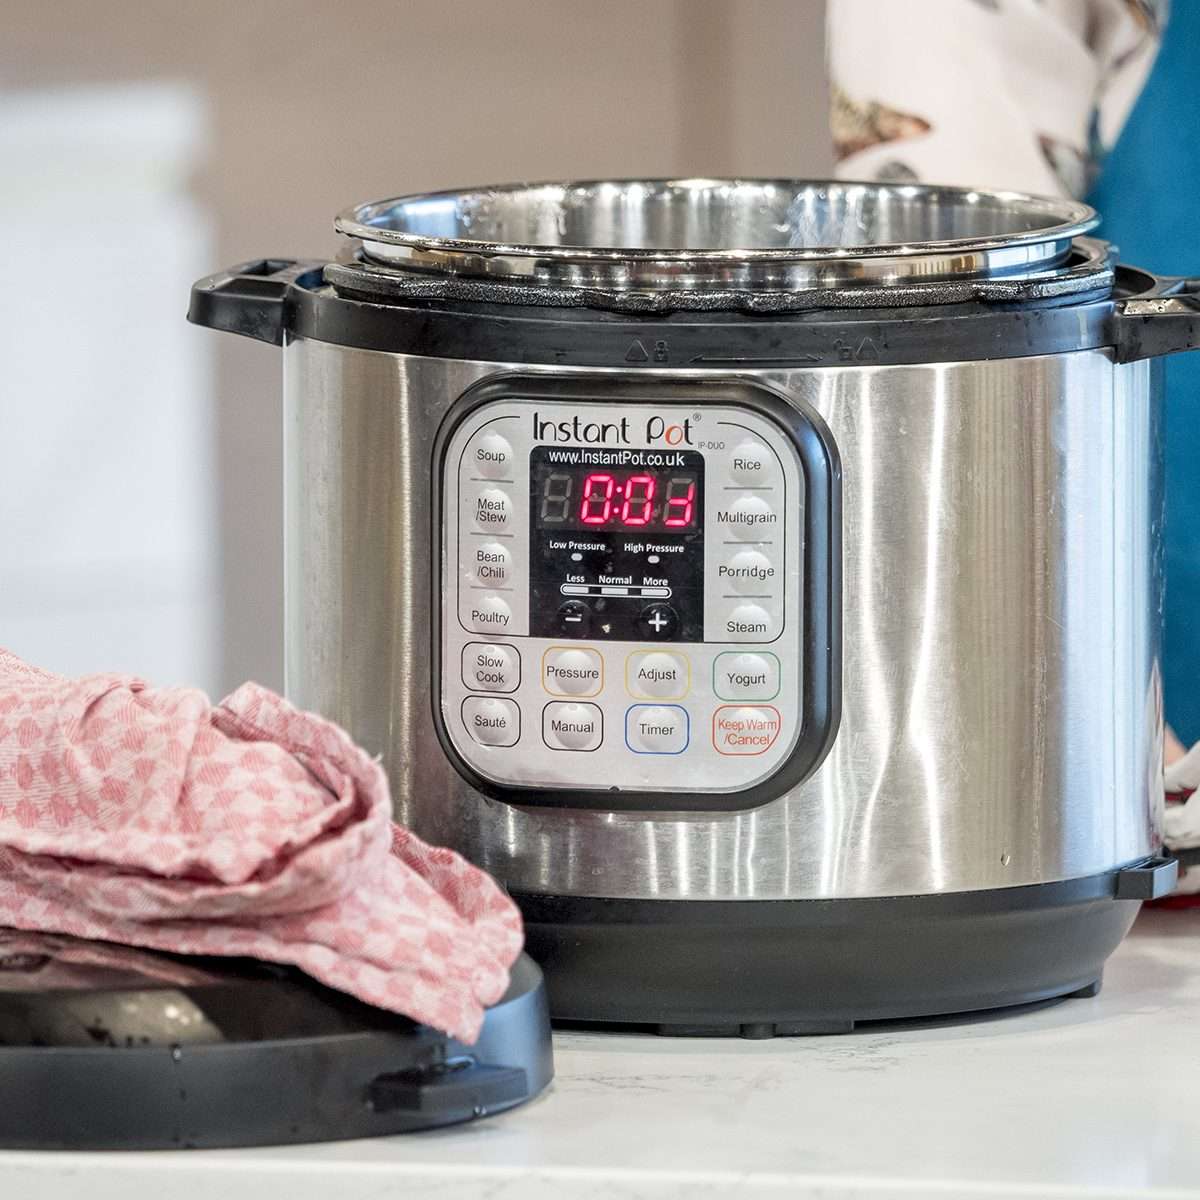 8 Instant Pot Meal Prep Ideas That Will Save You Tons of Time